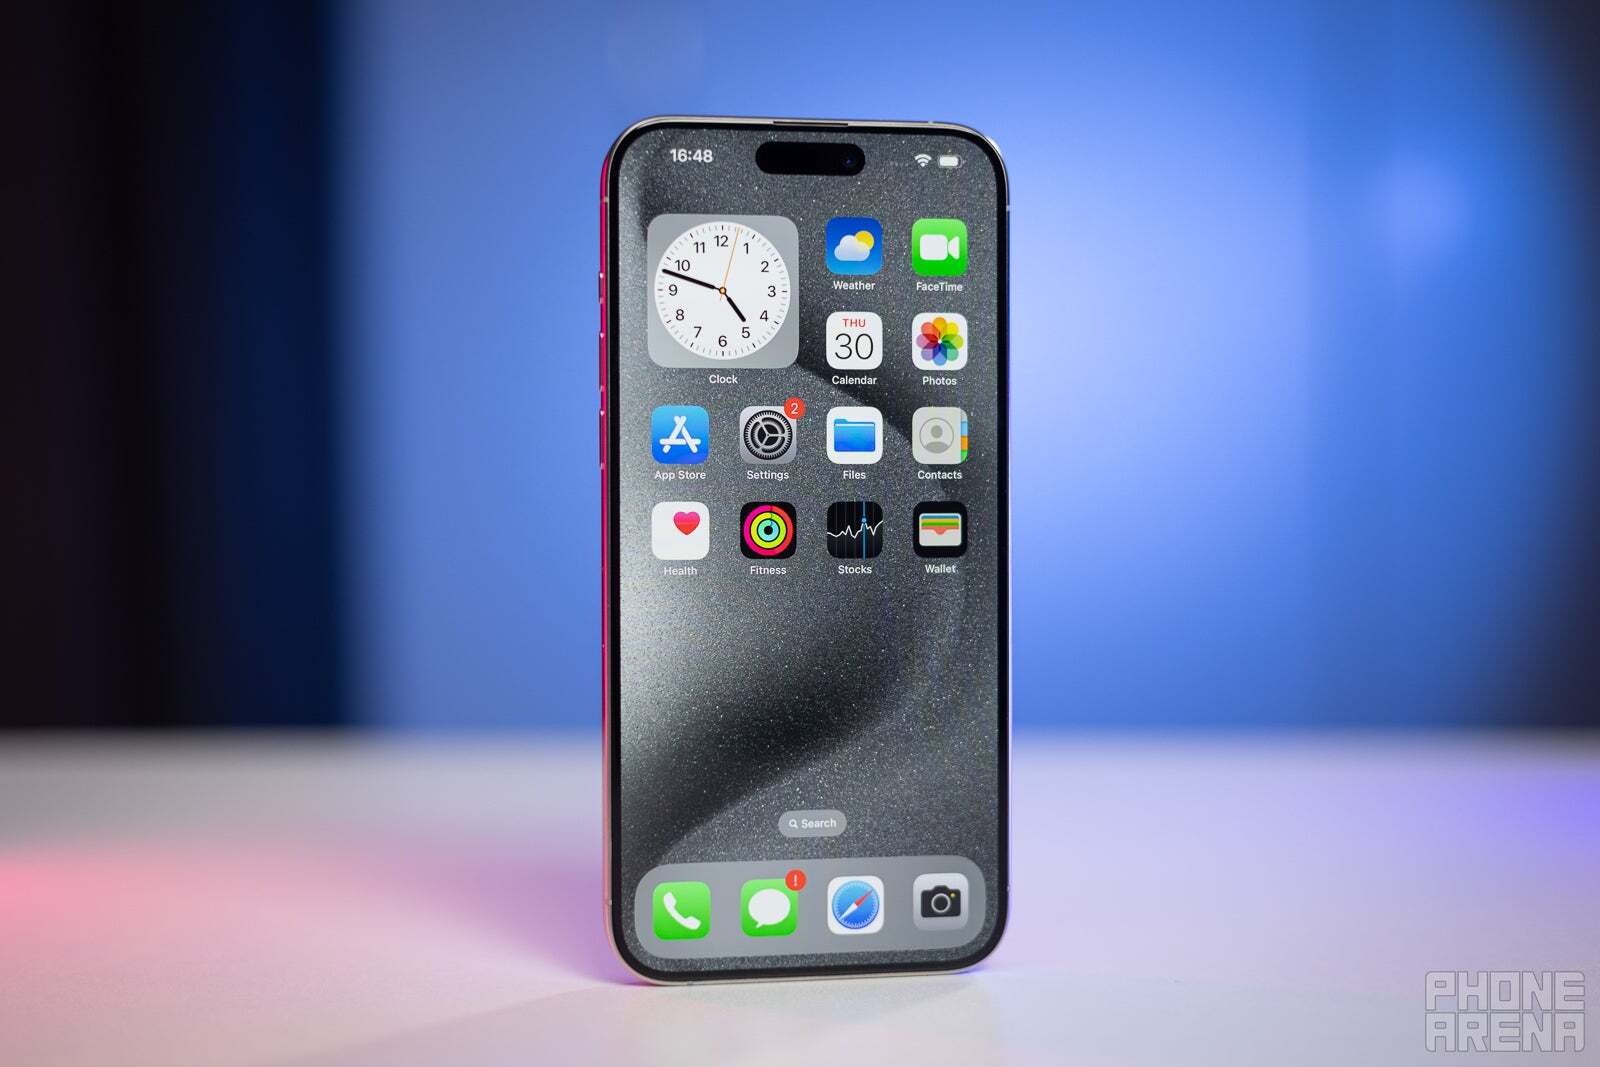 The iPhone 15 series, including the iPhone 15 Pro Max (pictured here) had a price cut in China earlier this year - iPhone shipments in China rose sharply last month to continue March&#039;s rebound